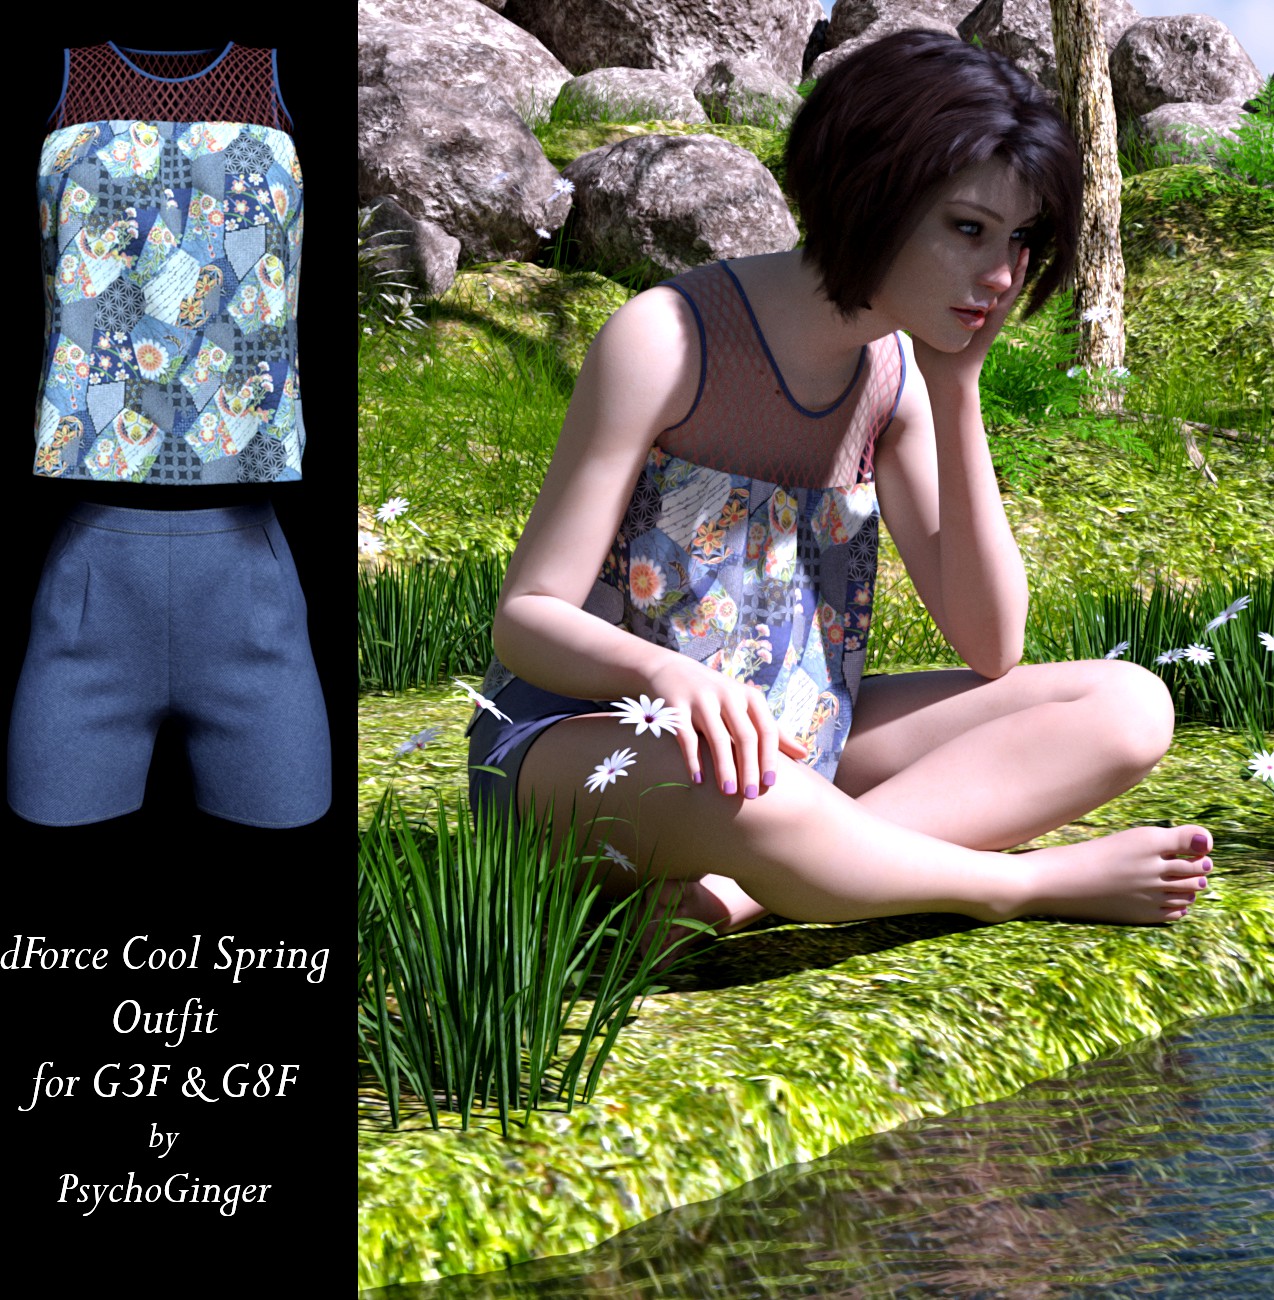 dForce Cool Spring Outfit for G3F & G8F